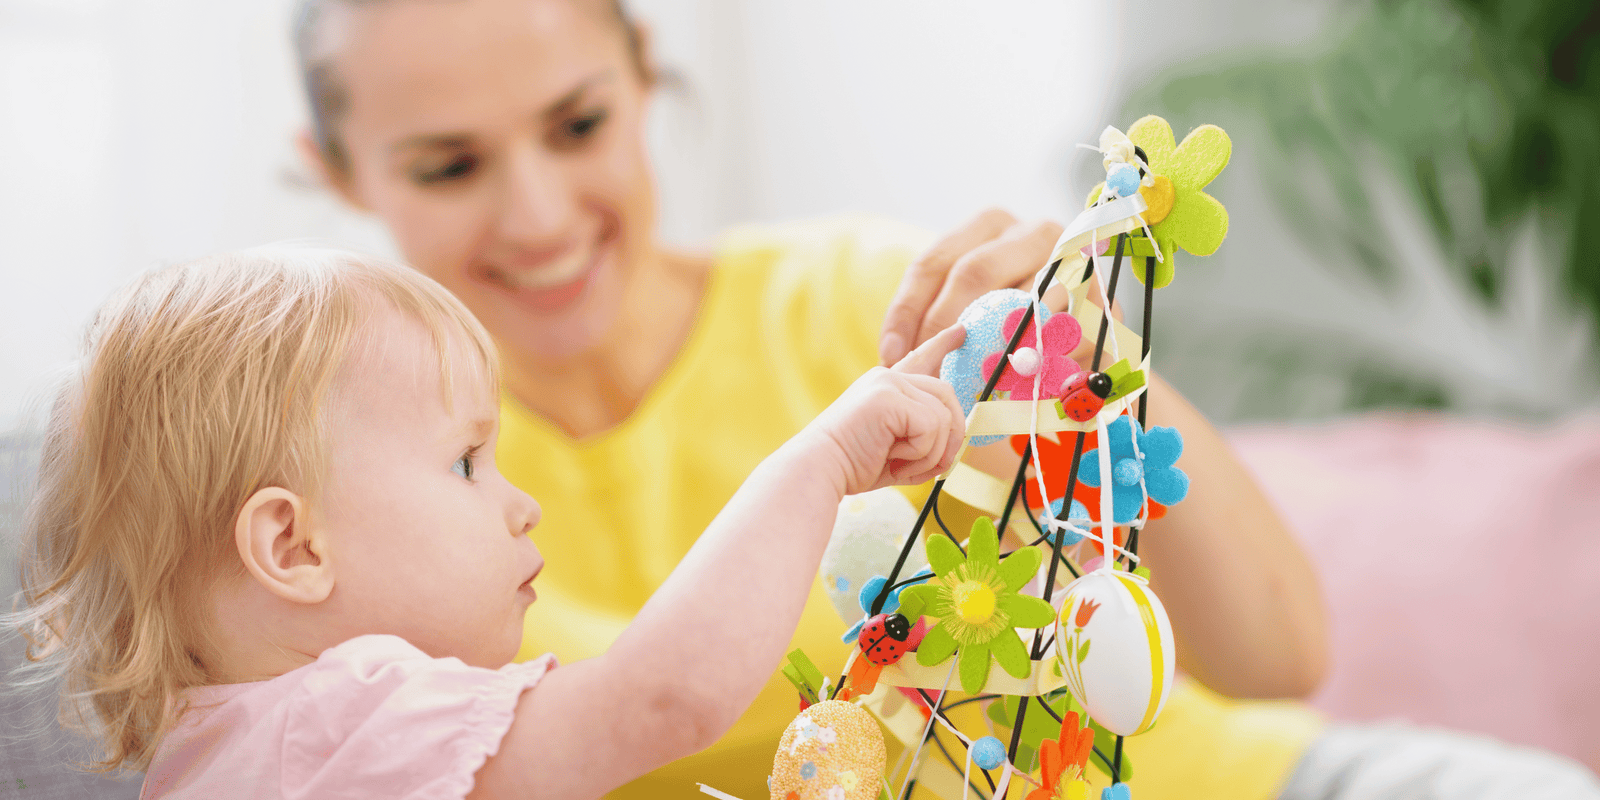 Childcare Jobs: Finding the right job, identifying red flags, and nailing your interview